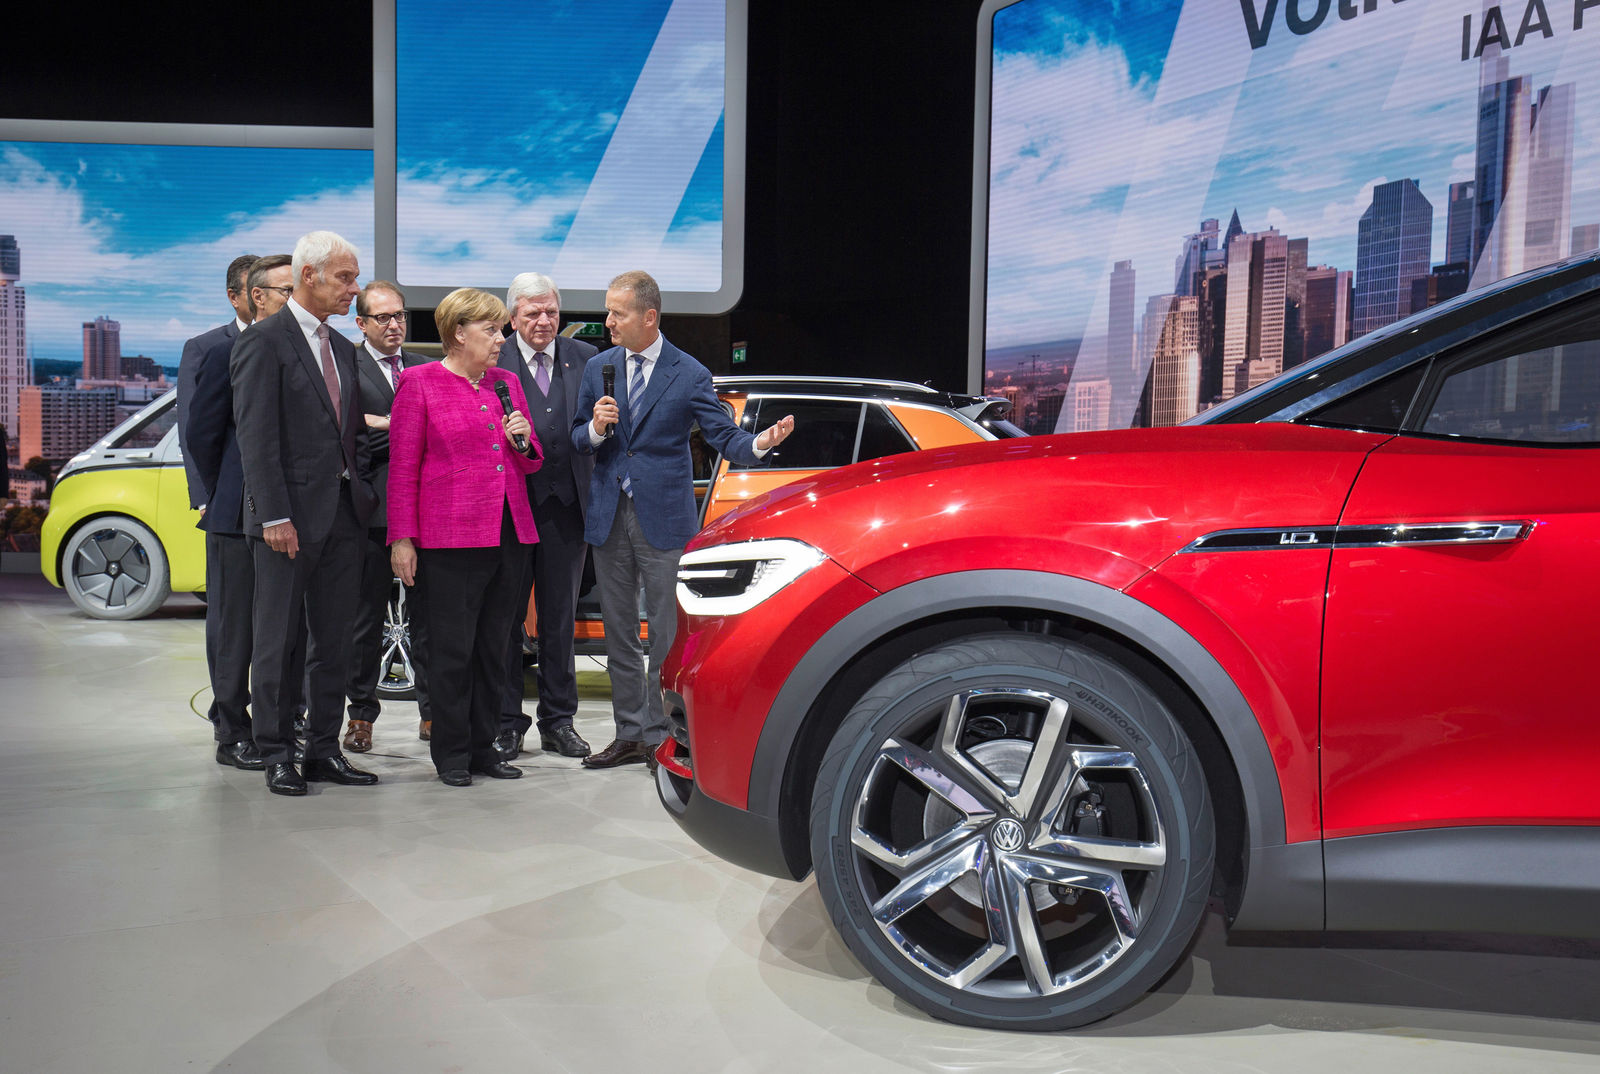 German Chancellor Dr. Angela Merkel visits the Volkswagen booth at the IAA 2017